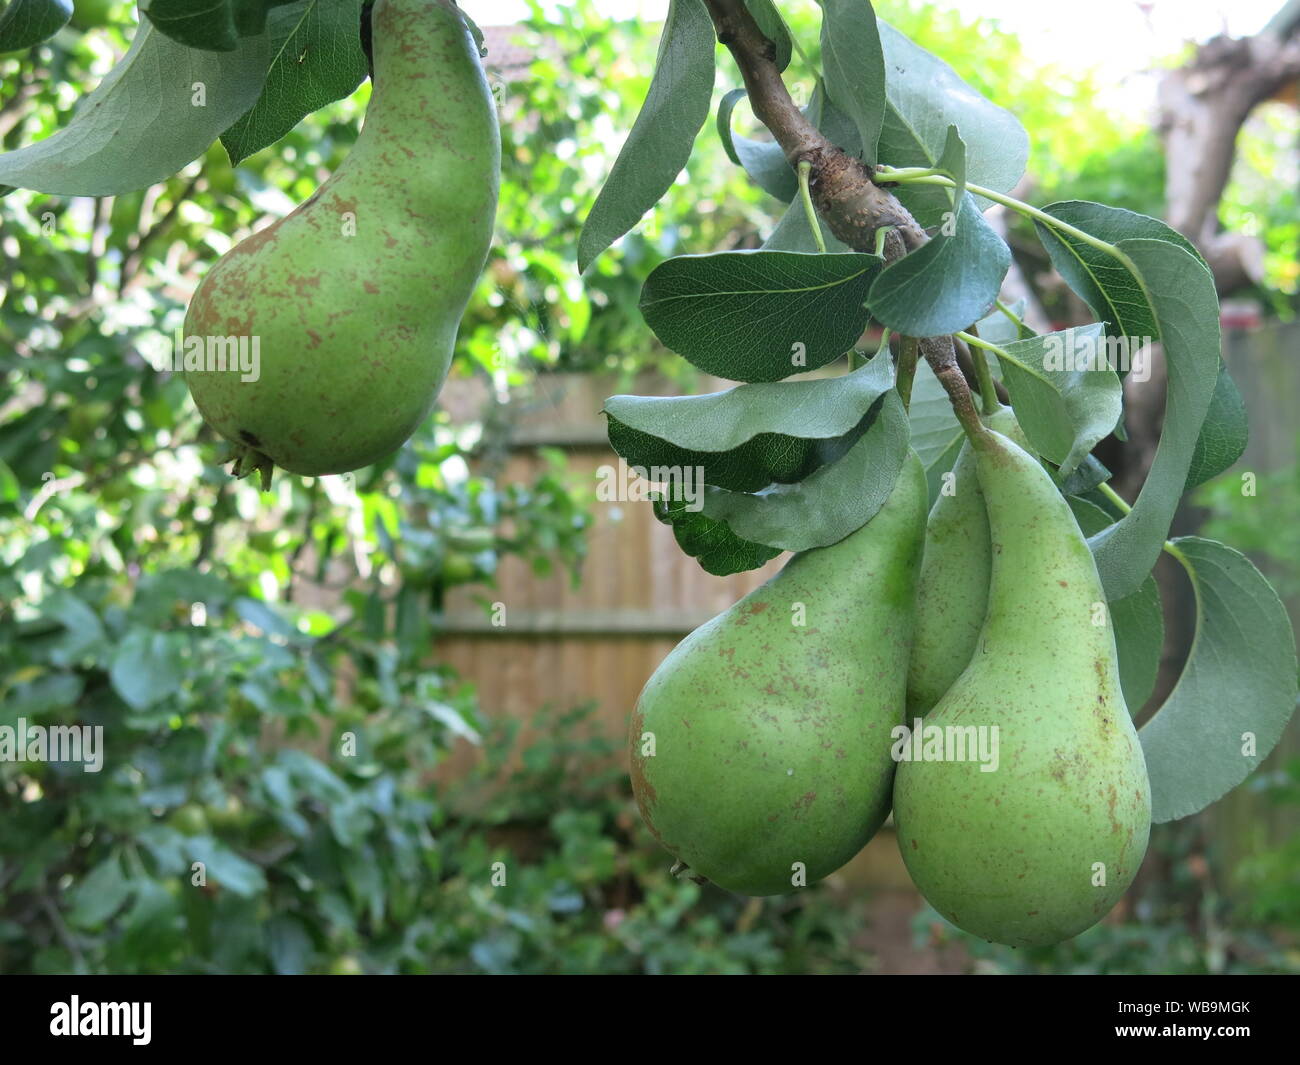 Close-up of three green pears of the variety 'Concorde' getting larger & riper on a garden tree as the English summer progresses towards harvest time. Stock Photo